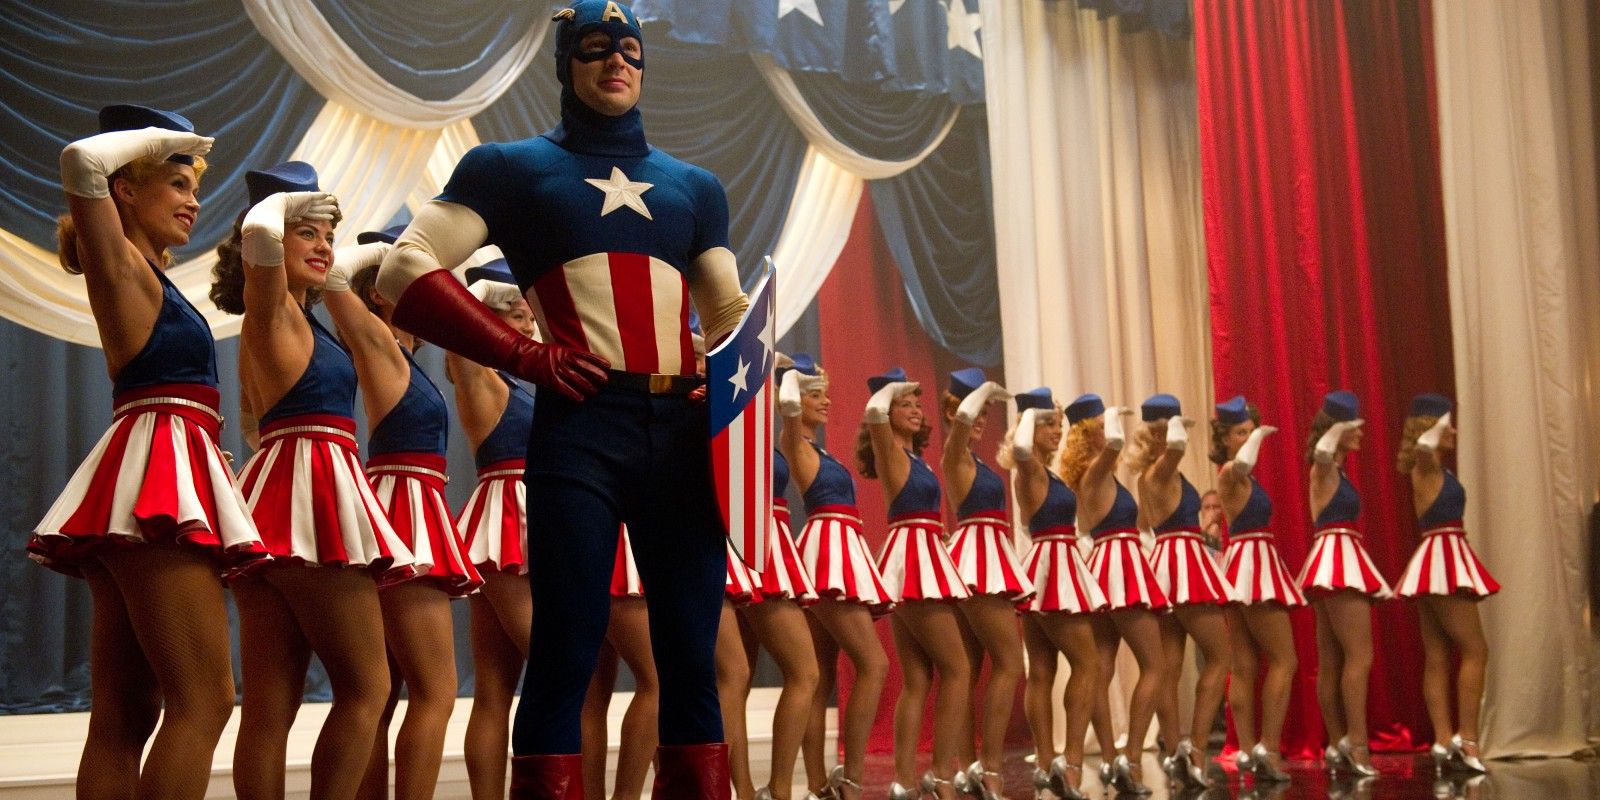 Captain America performing during the USO tour 